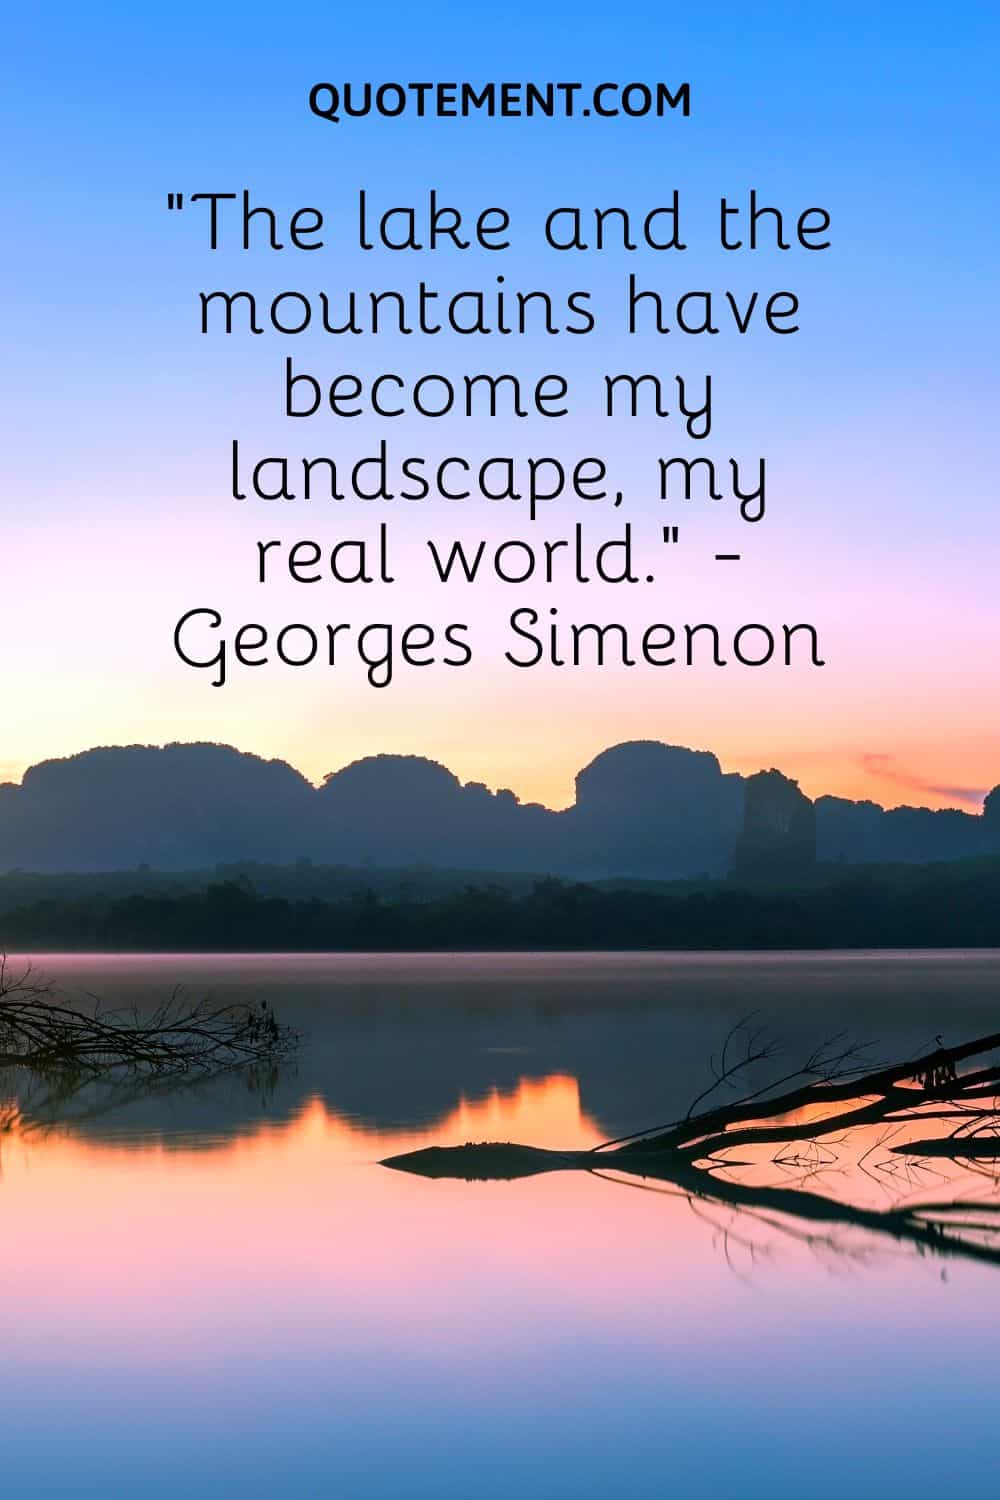 “The lake and the mountains have become my landscape, my real world.” - Georges Simenon